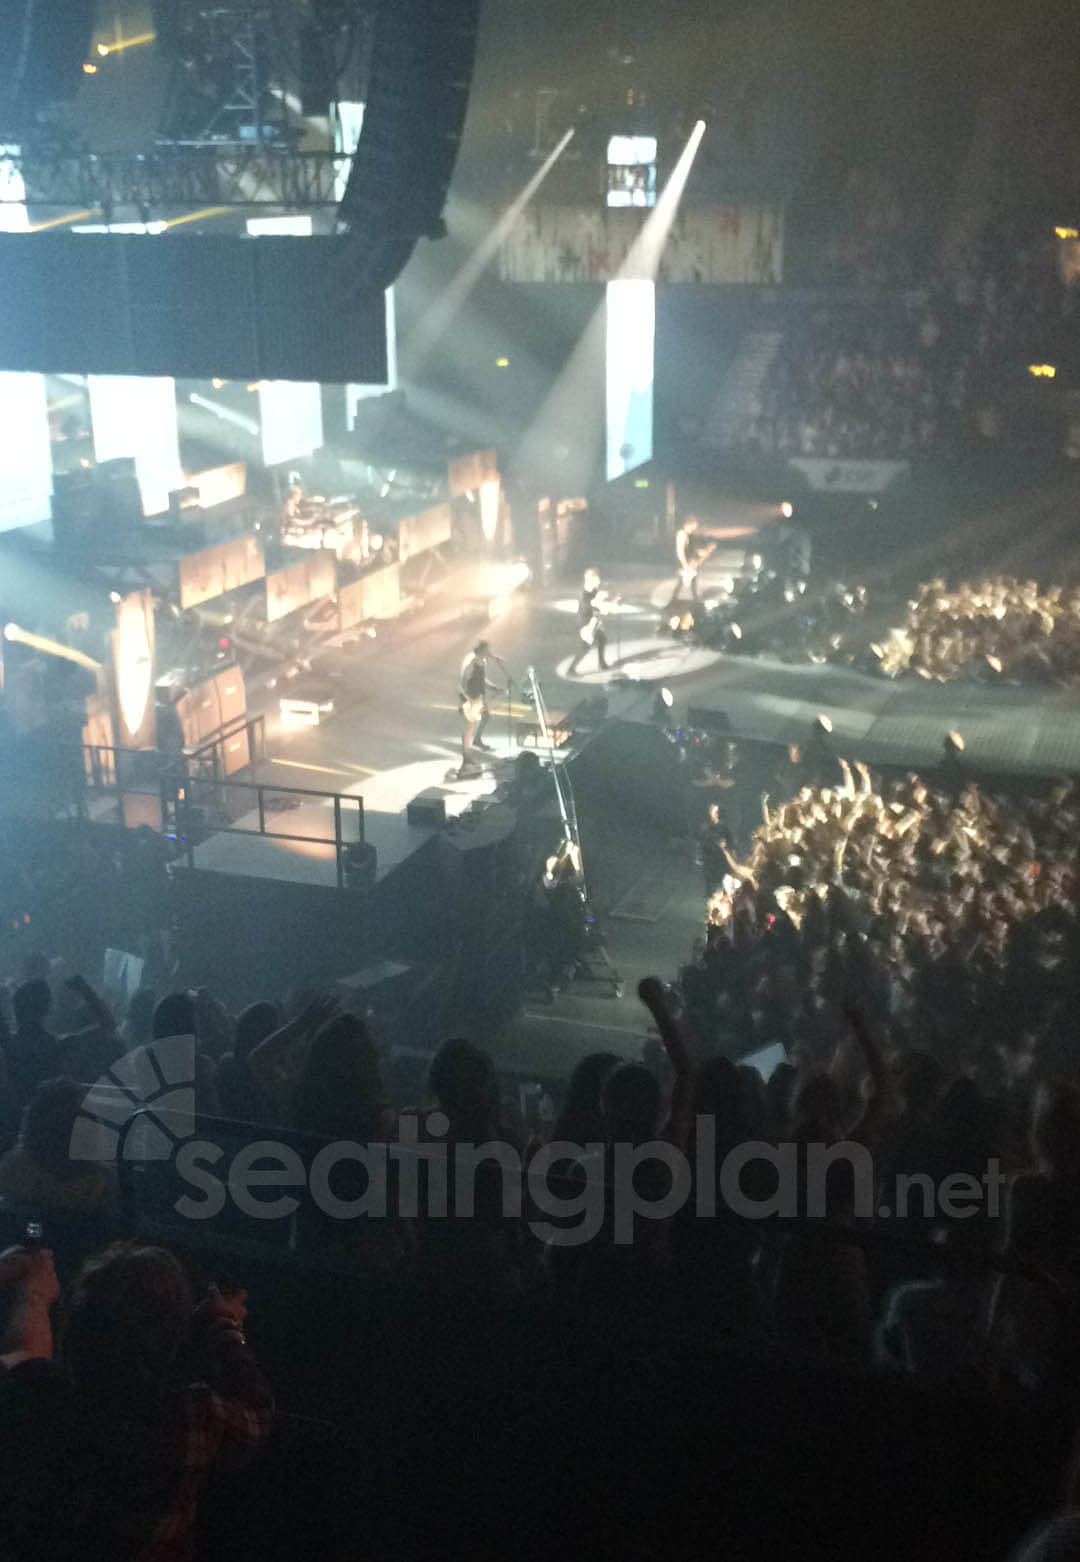 View of 5 Seconds of Summer at OVO Arena Wembley from Seat Block S5